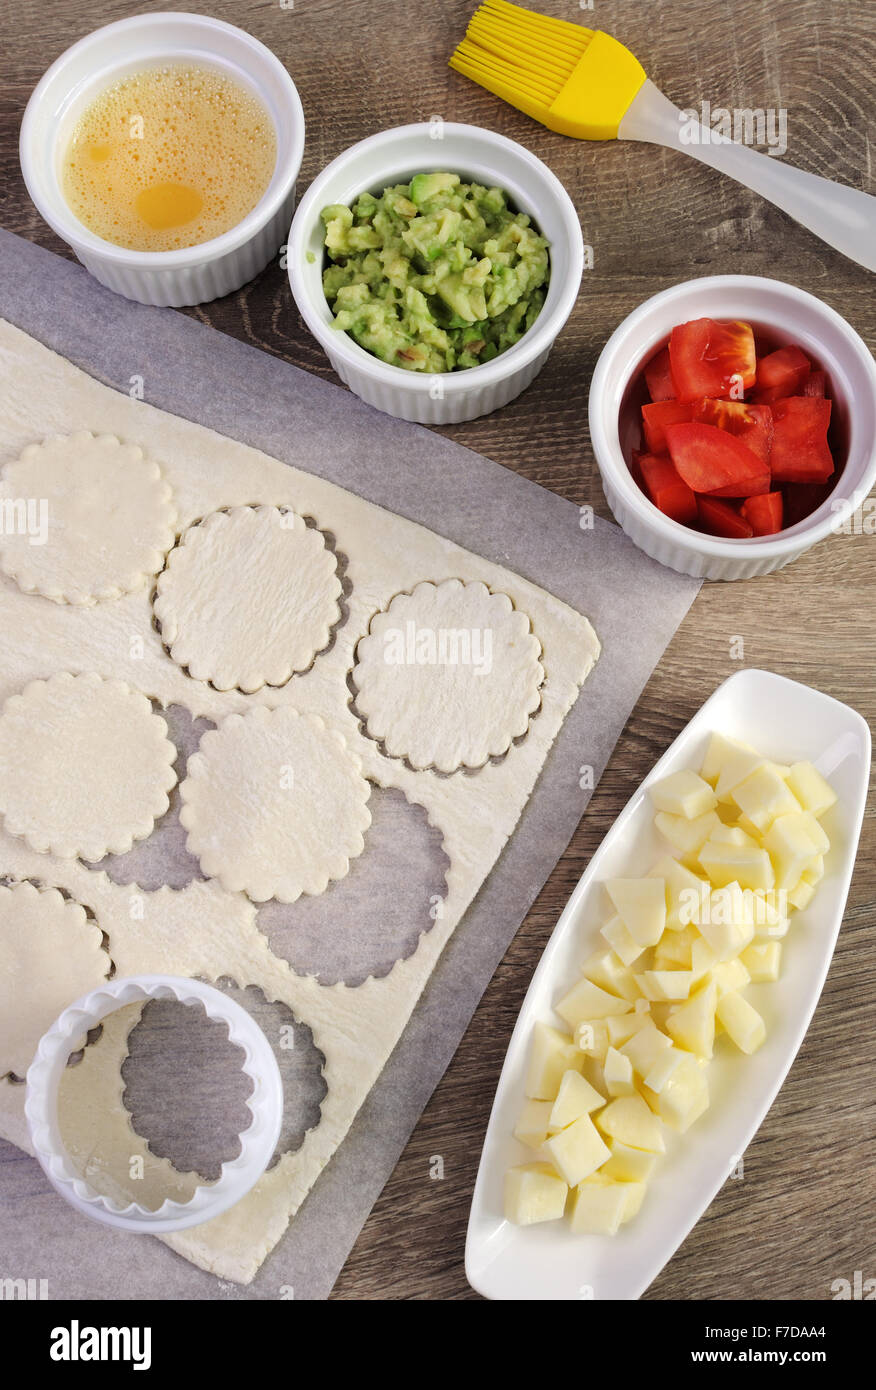 Ingredients for baking bun of puff pastry with cheese, tomato, avocado Stock Photo